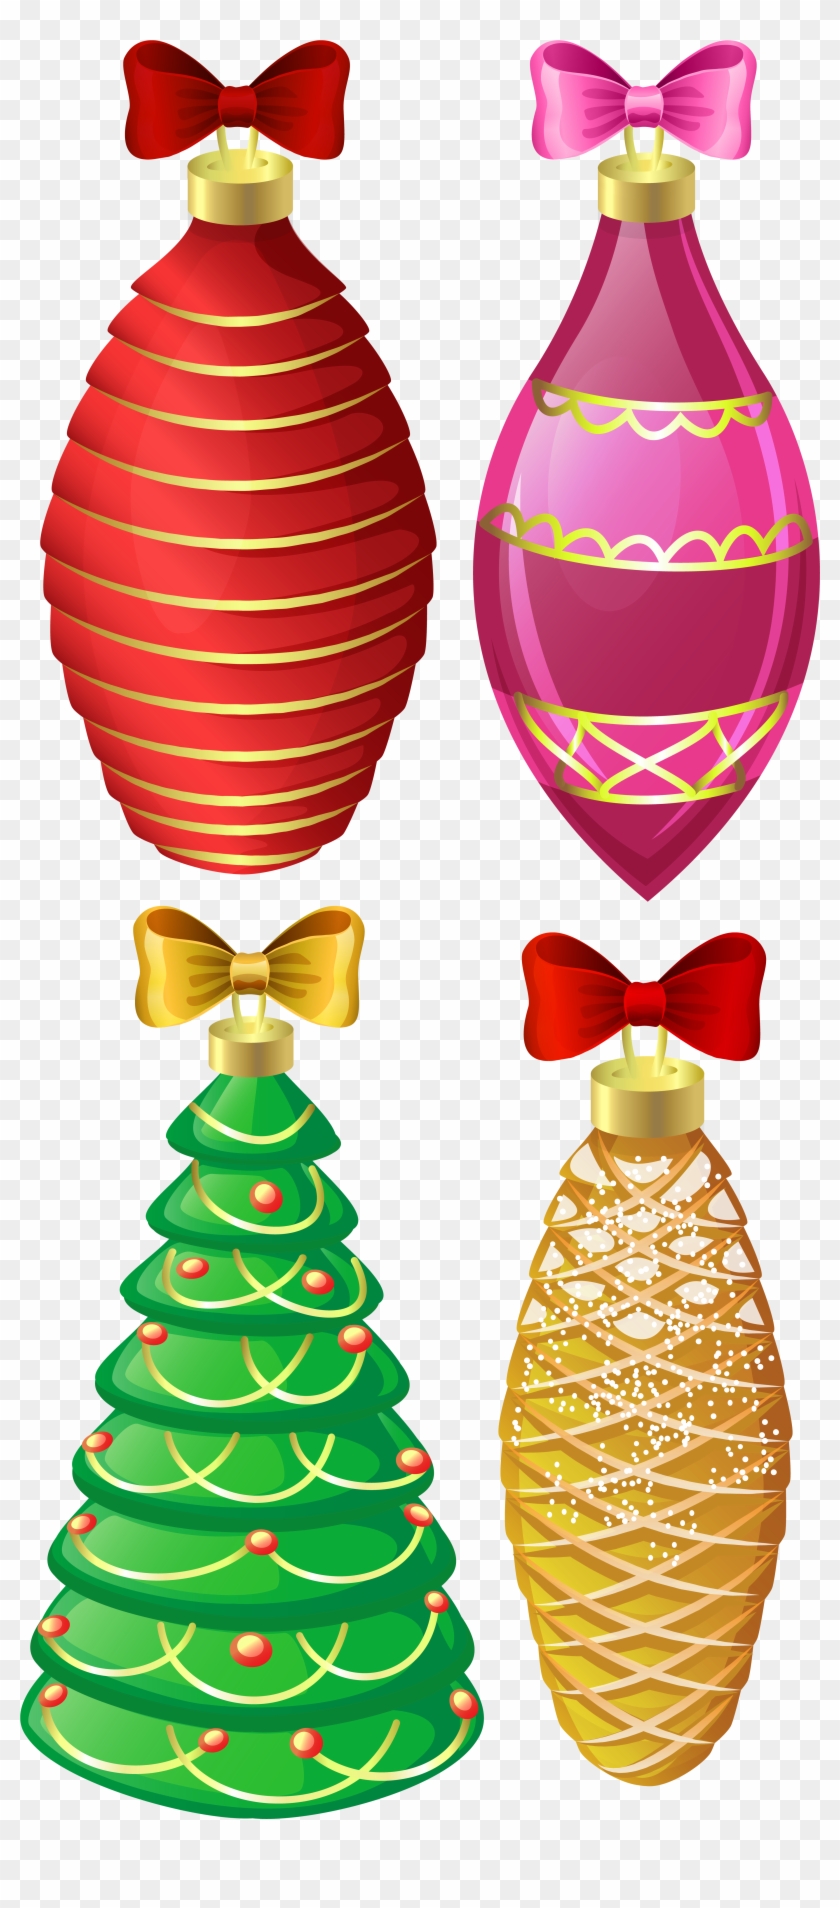 Christmas Ornaments Png Image Clipart